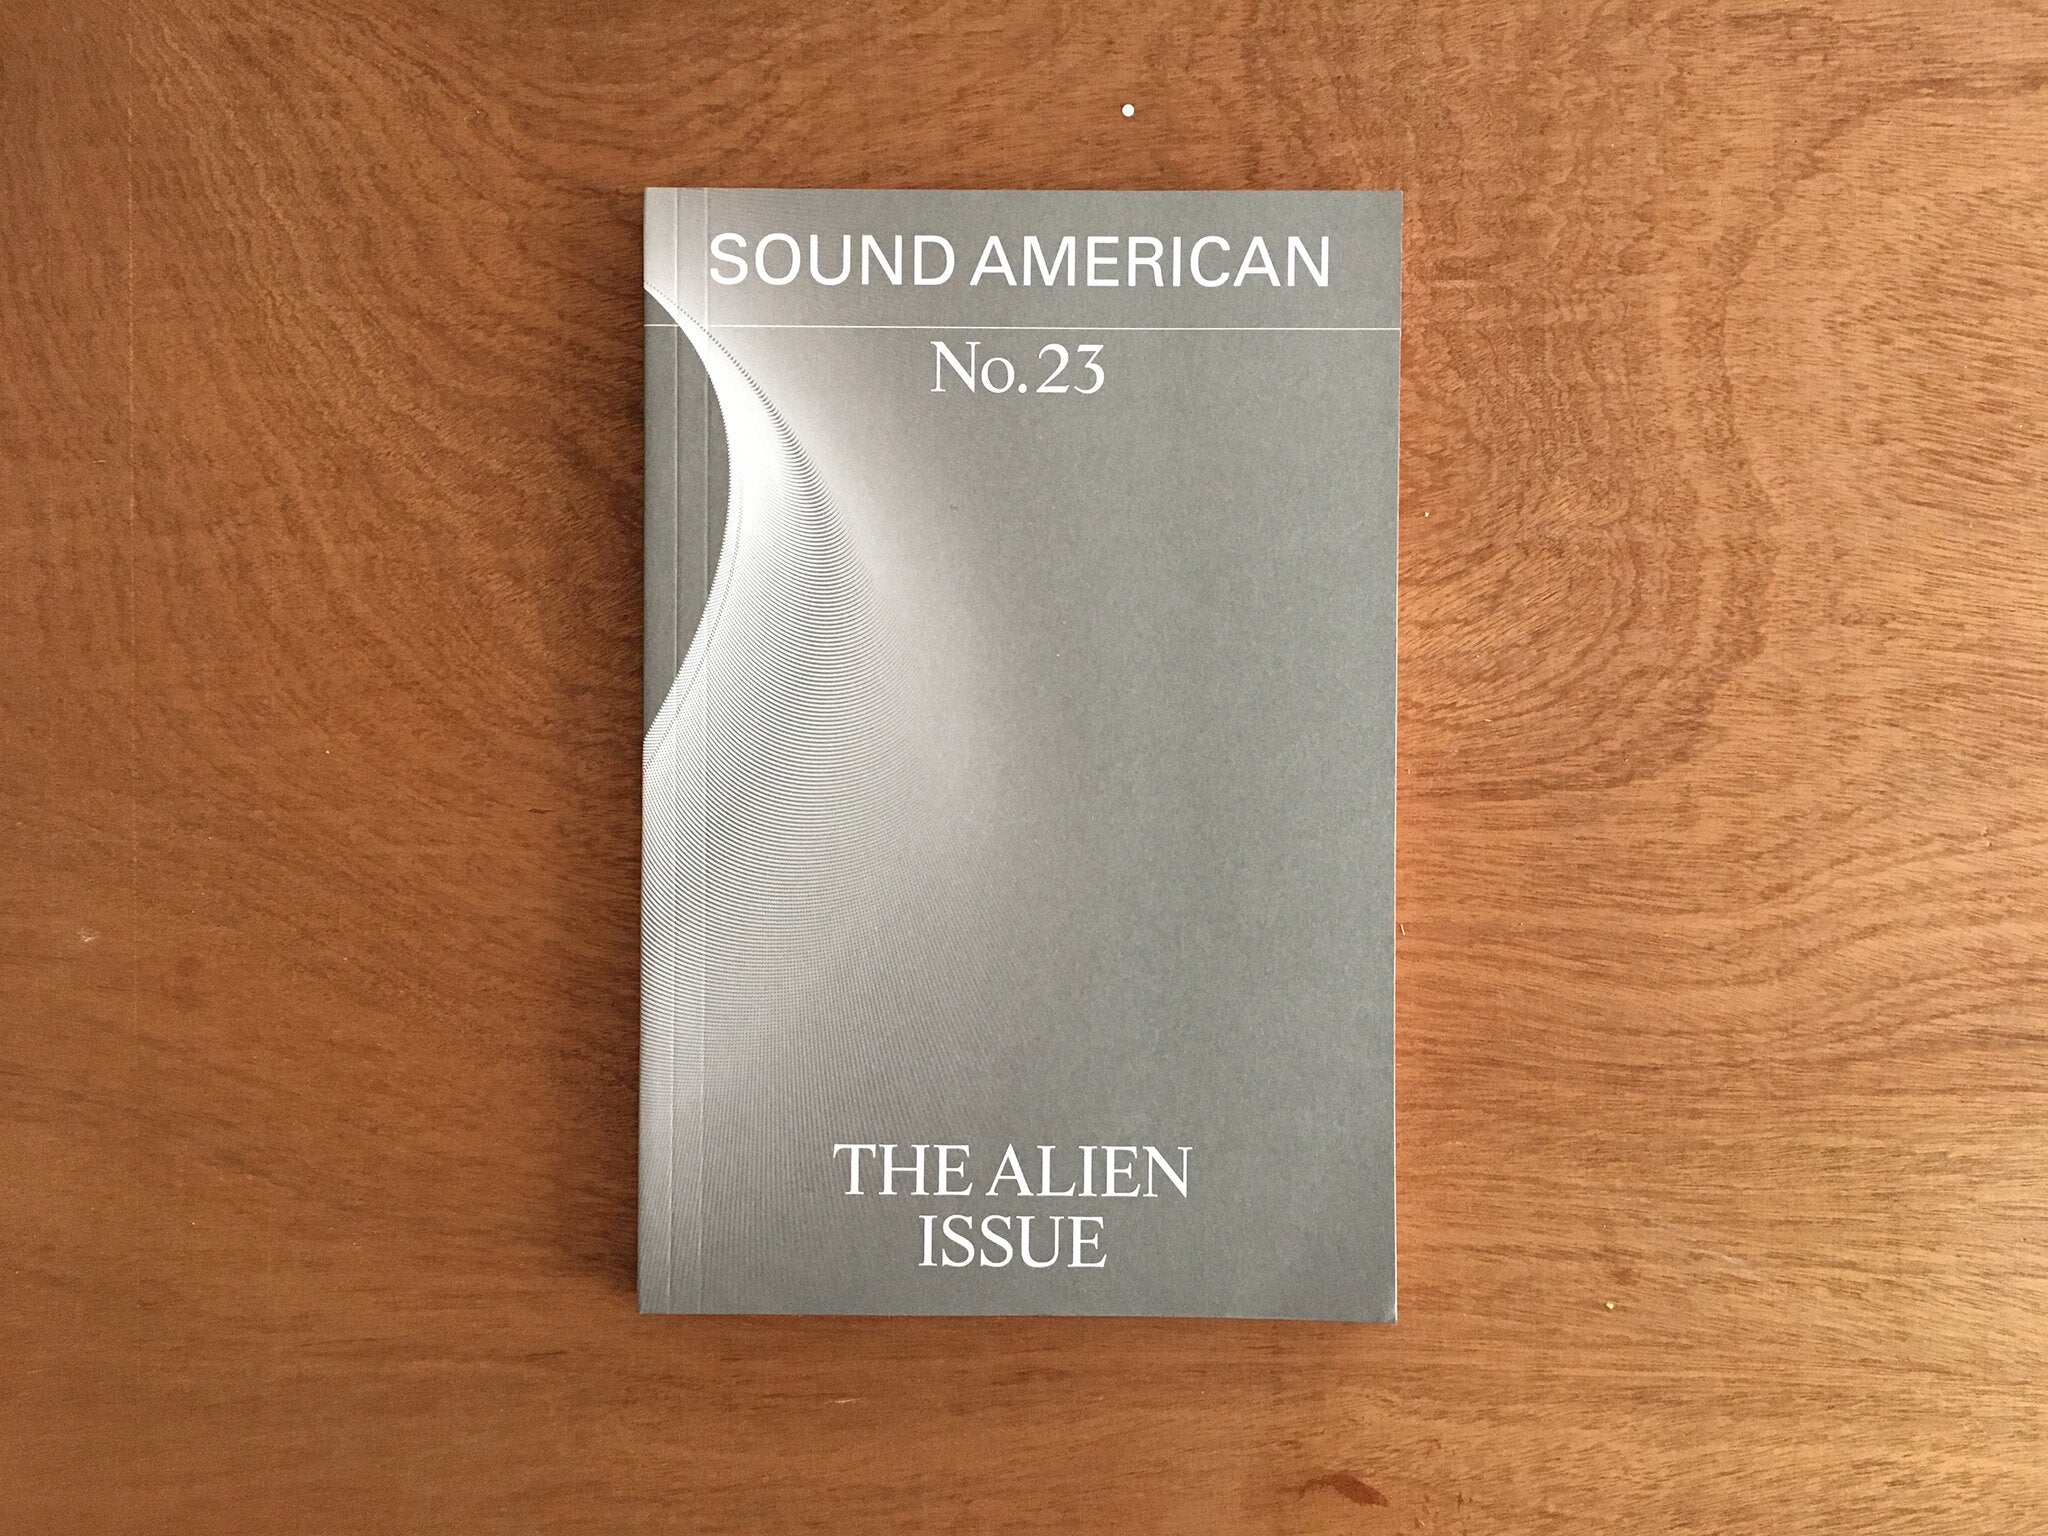 SOUND AMERICAN #23 — THE ALIEN ISSUE